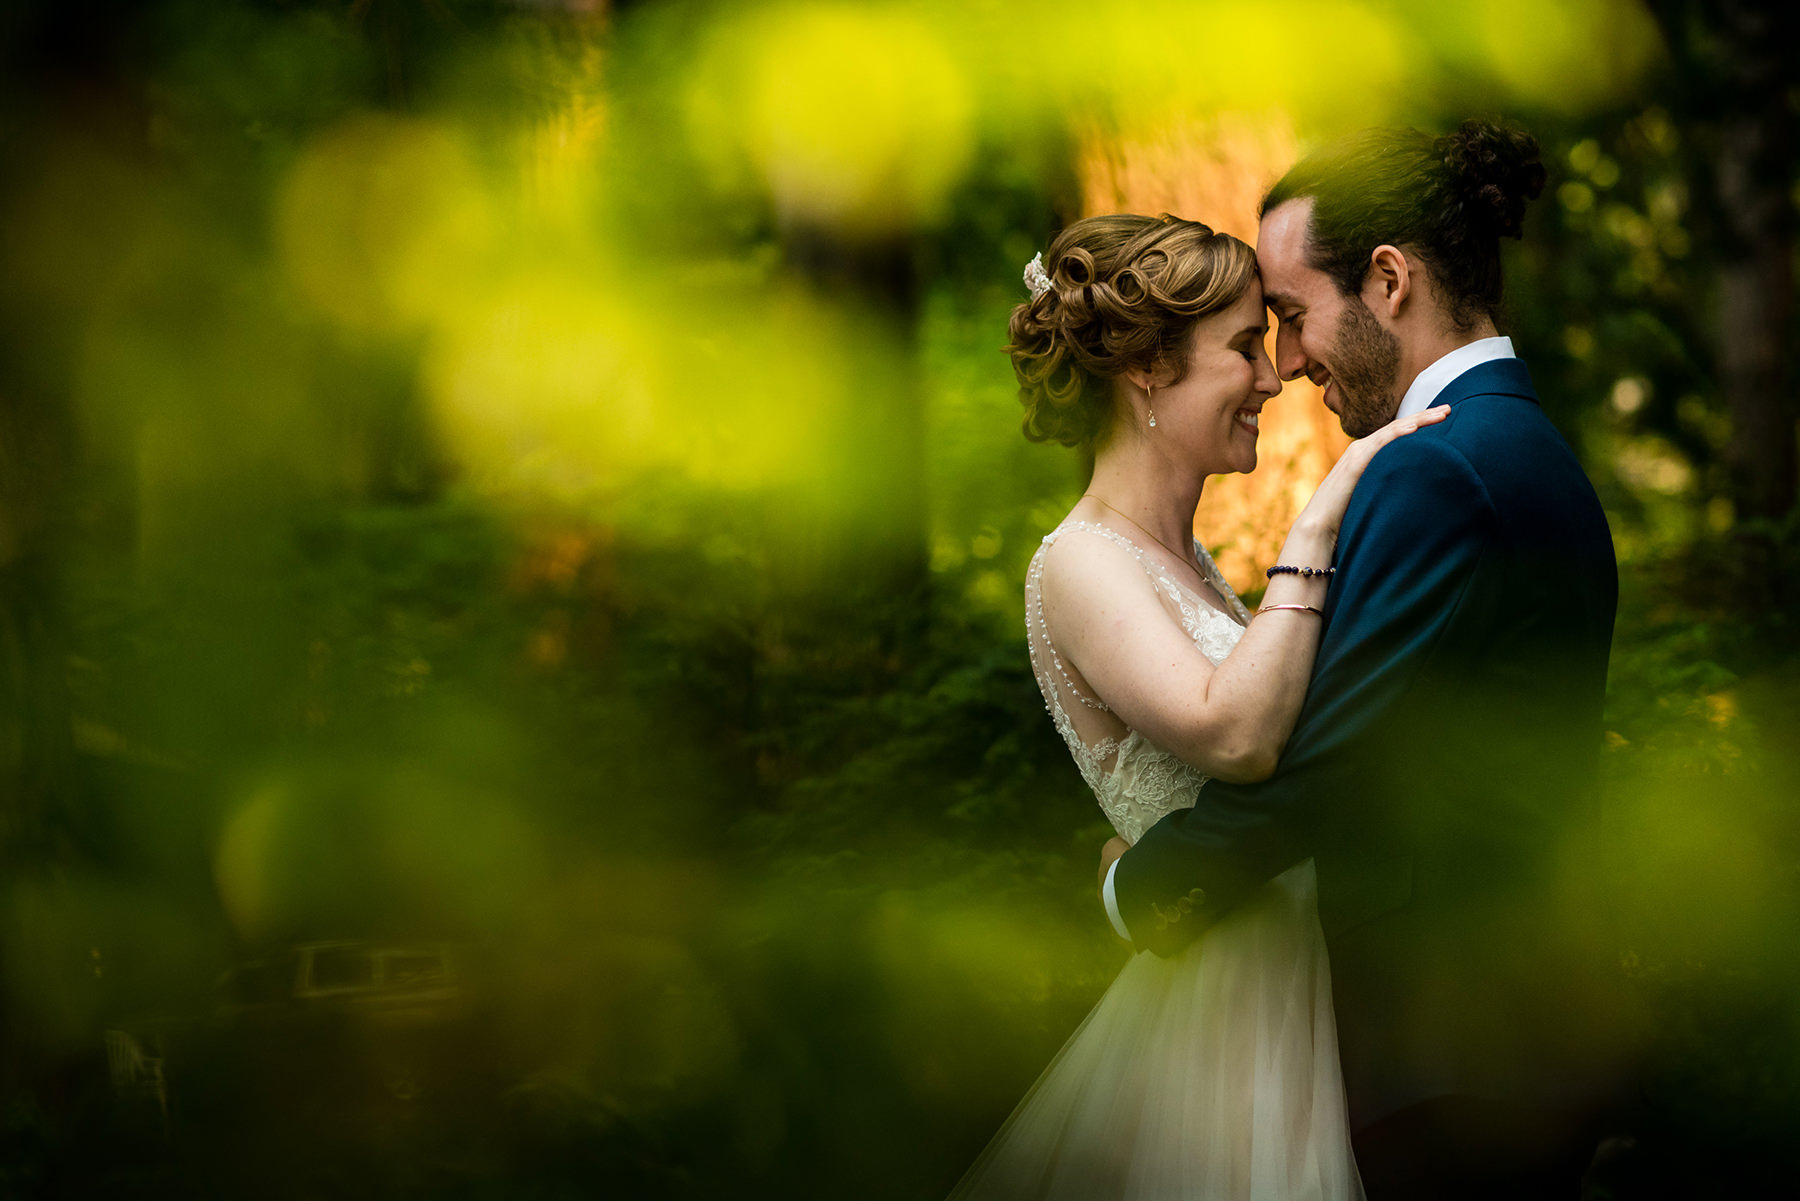 creative forests wedding photo